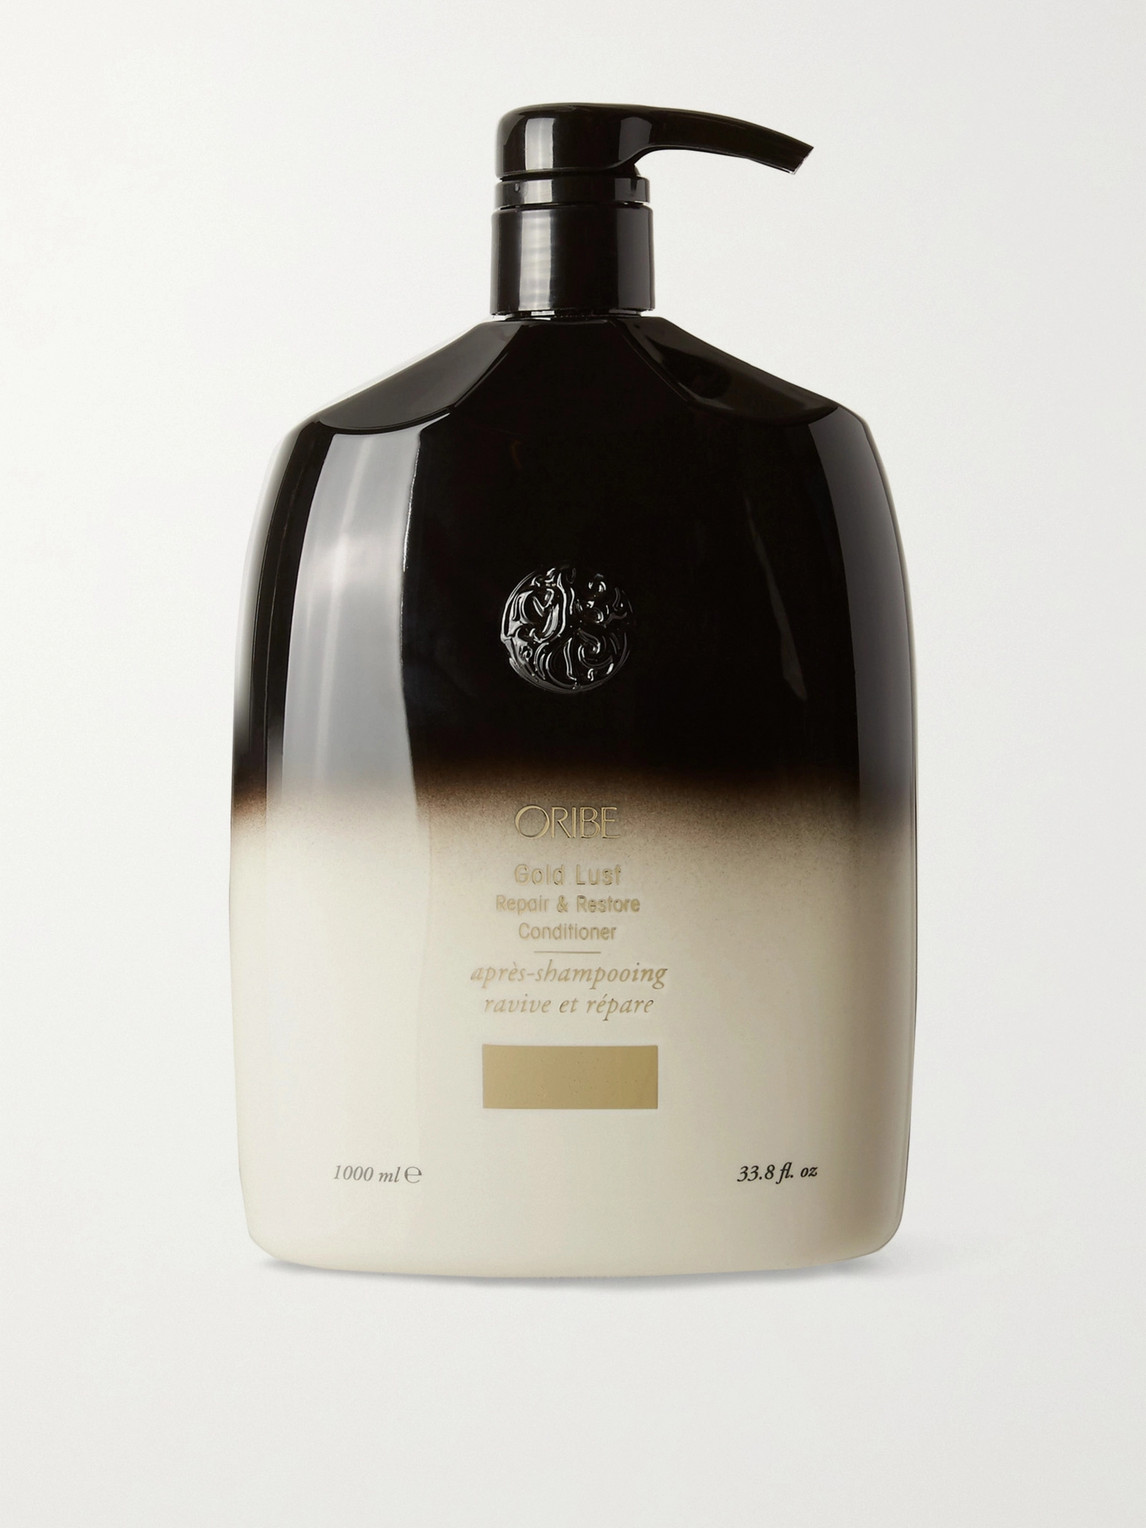 Oribe Gold Lust Repair & Restore Conditioner, 1000ml - One Size In Colorless